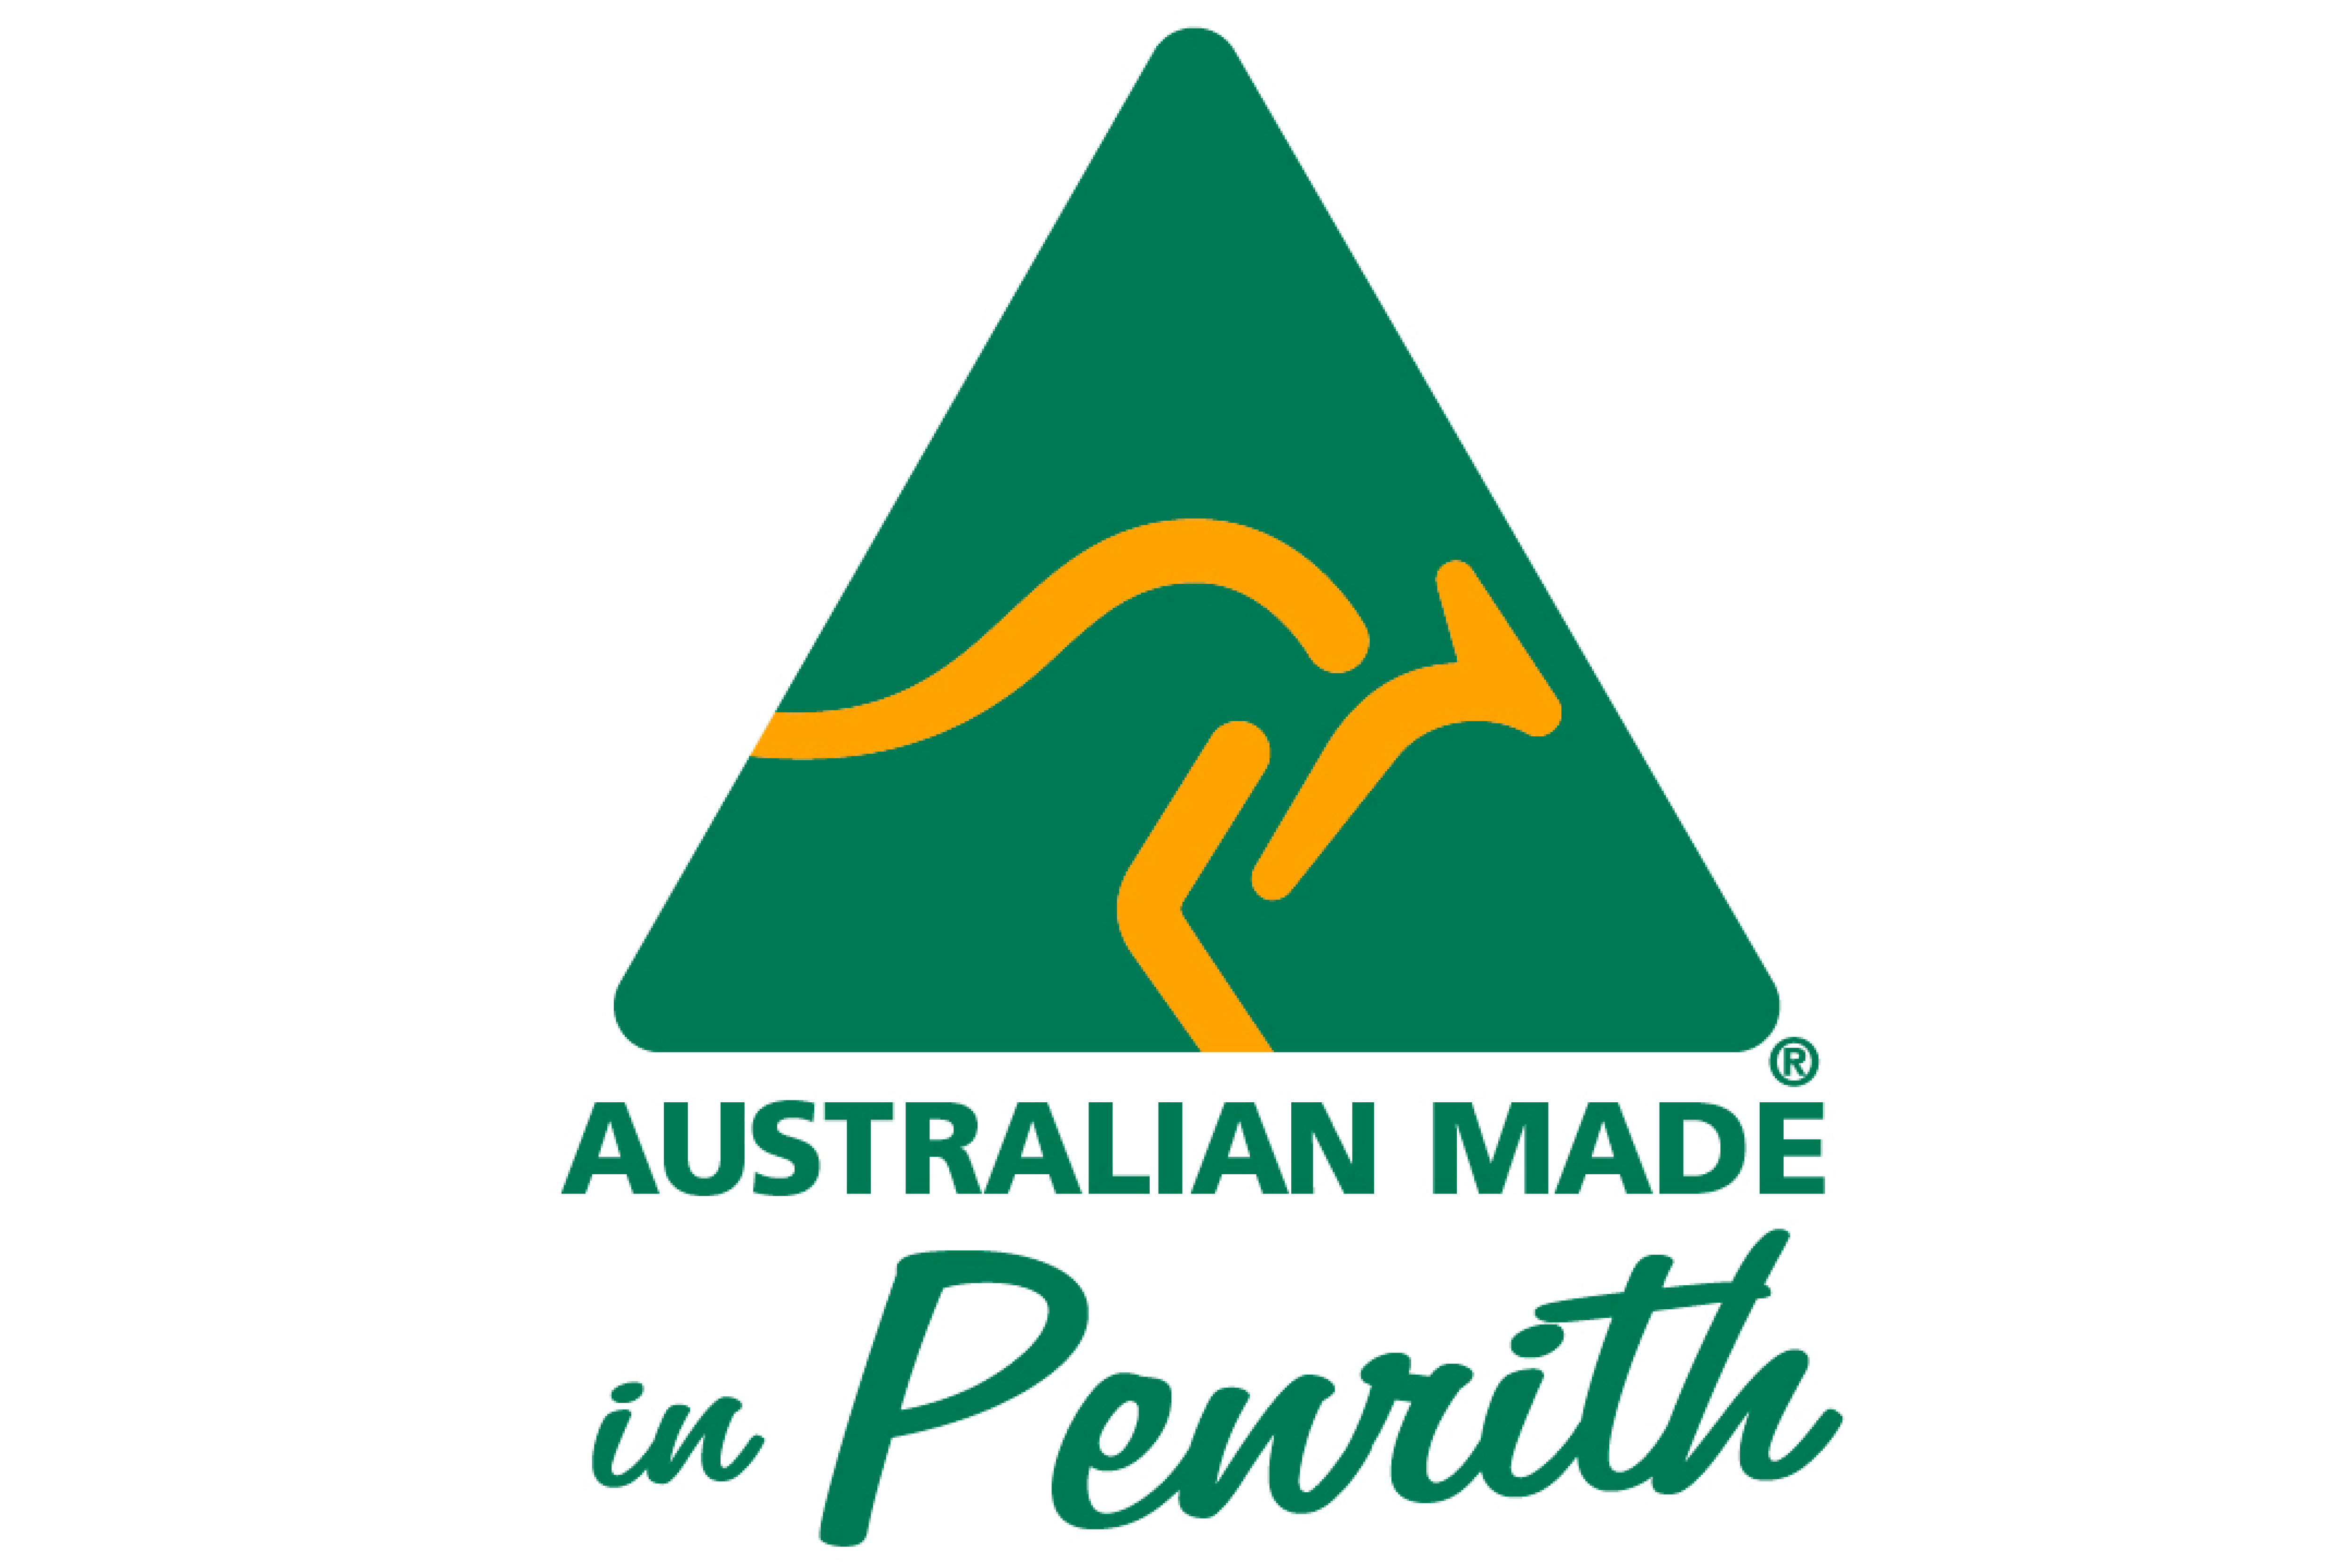 green triangle with yellow kangaroo graphic and text Australian Made in Penrith